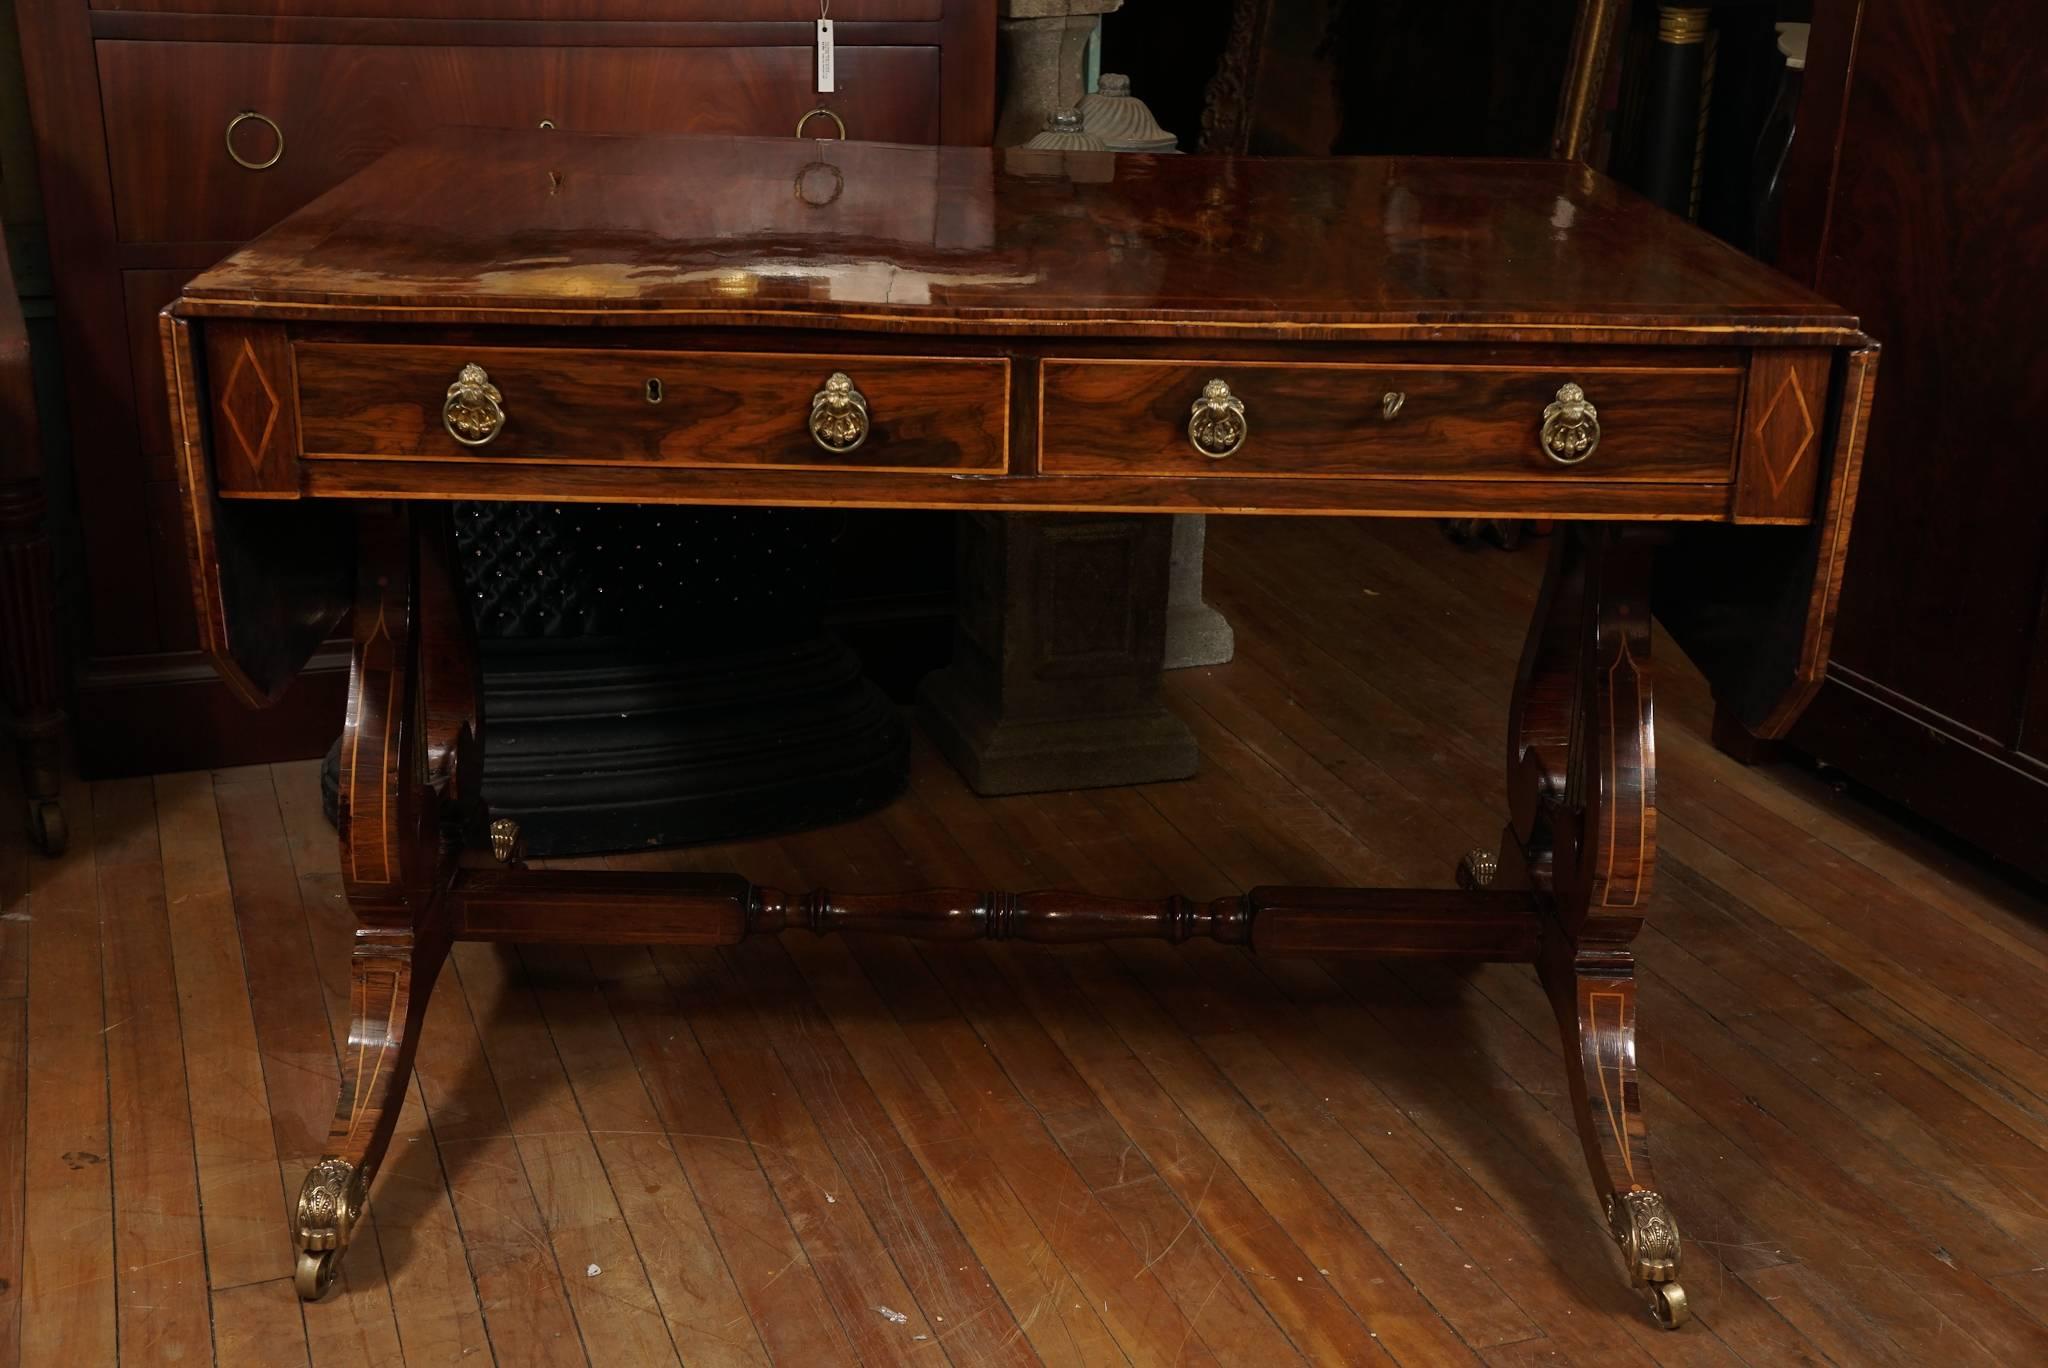 This period sofa table is a fine example of furniture made in the classical taste. Constructed in circa 1815 the table has good wood grain patterns showing the care taken in craftsmanship by the maker. Selected to create a book matched pattern